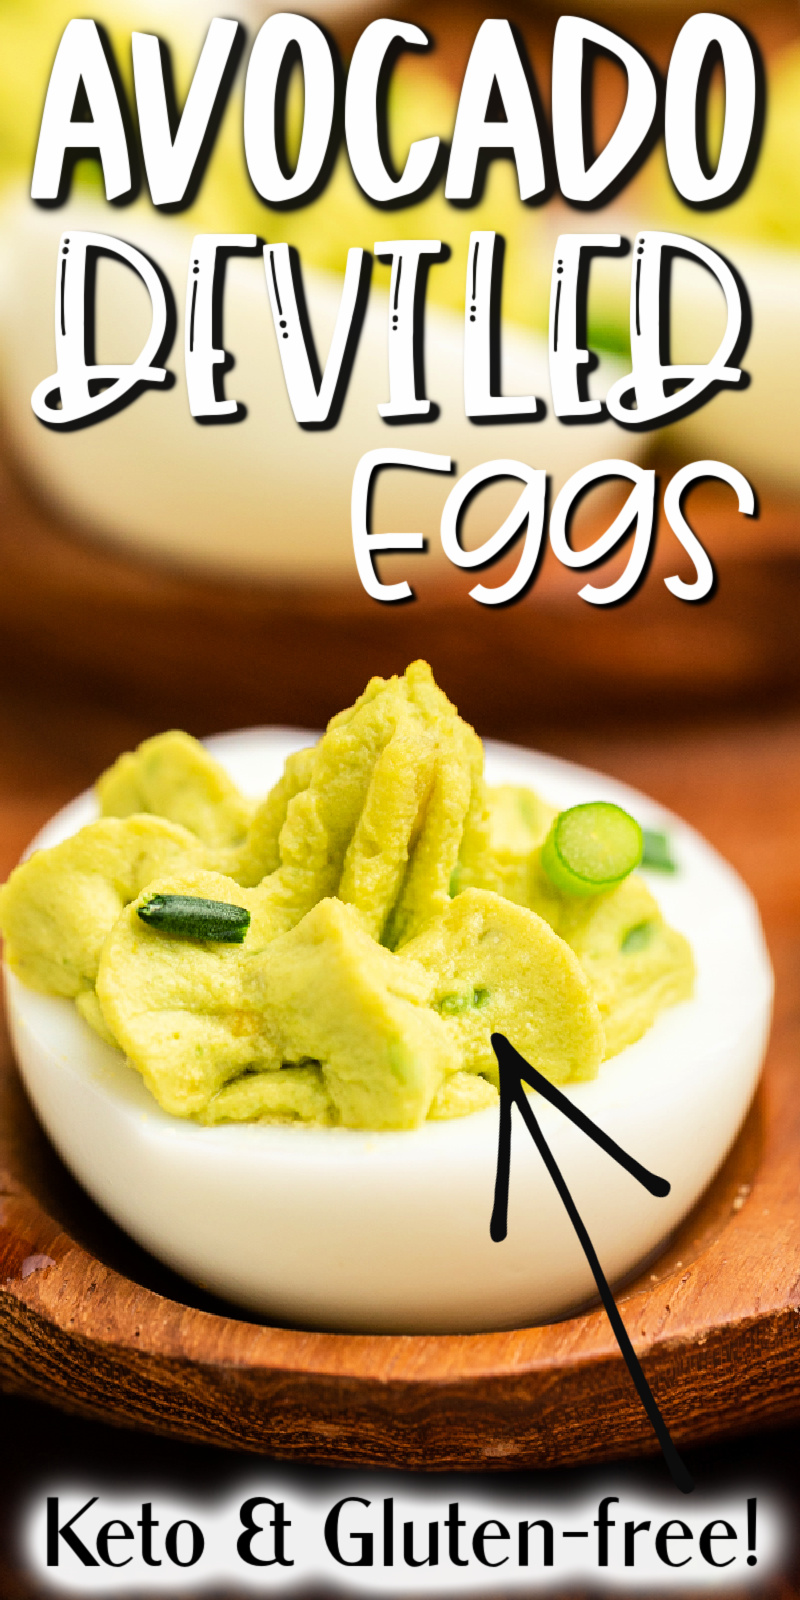 Avocado Deviled Eggs - These avocado deviled eggs are the perfect keto and low carb snack! Packed with protein and superfood fats from the avocado, they keep your macros and your taste buds happy. #keto #lowcarb #glutenfree #fatbomb #eggs #egg #deviled #avocado #snack #appetizer #recipe